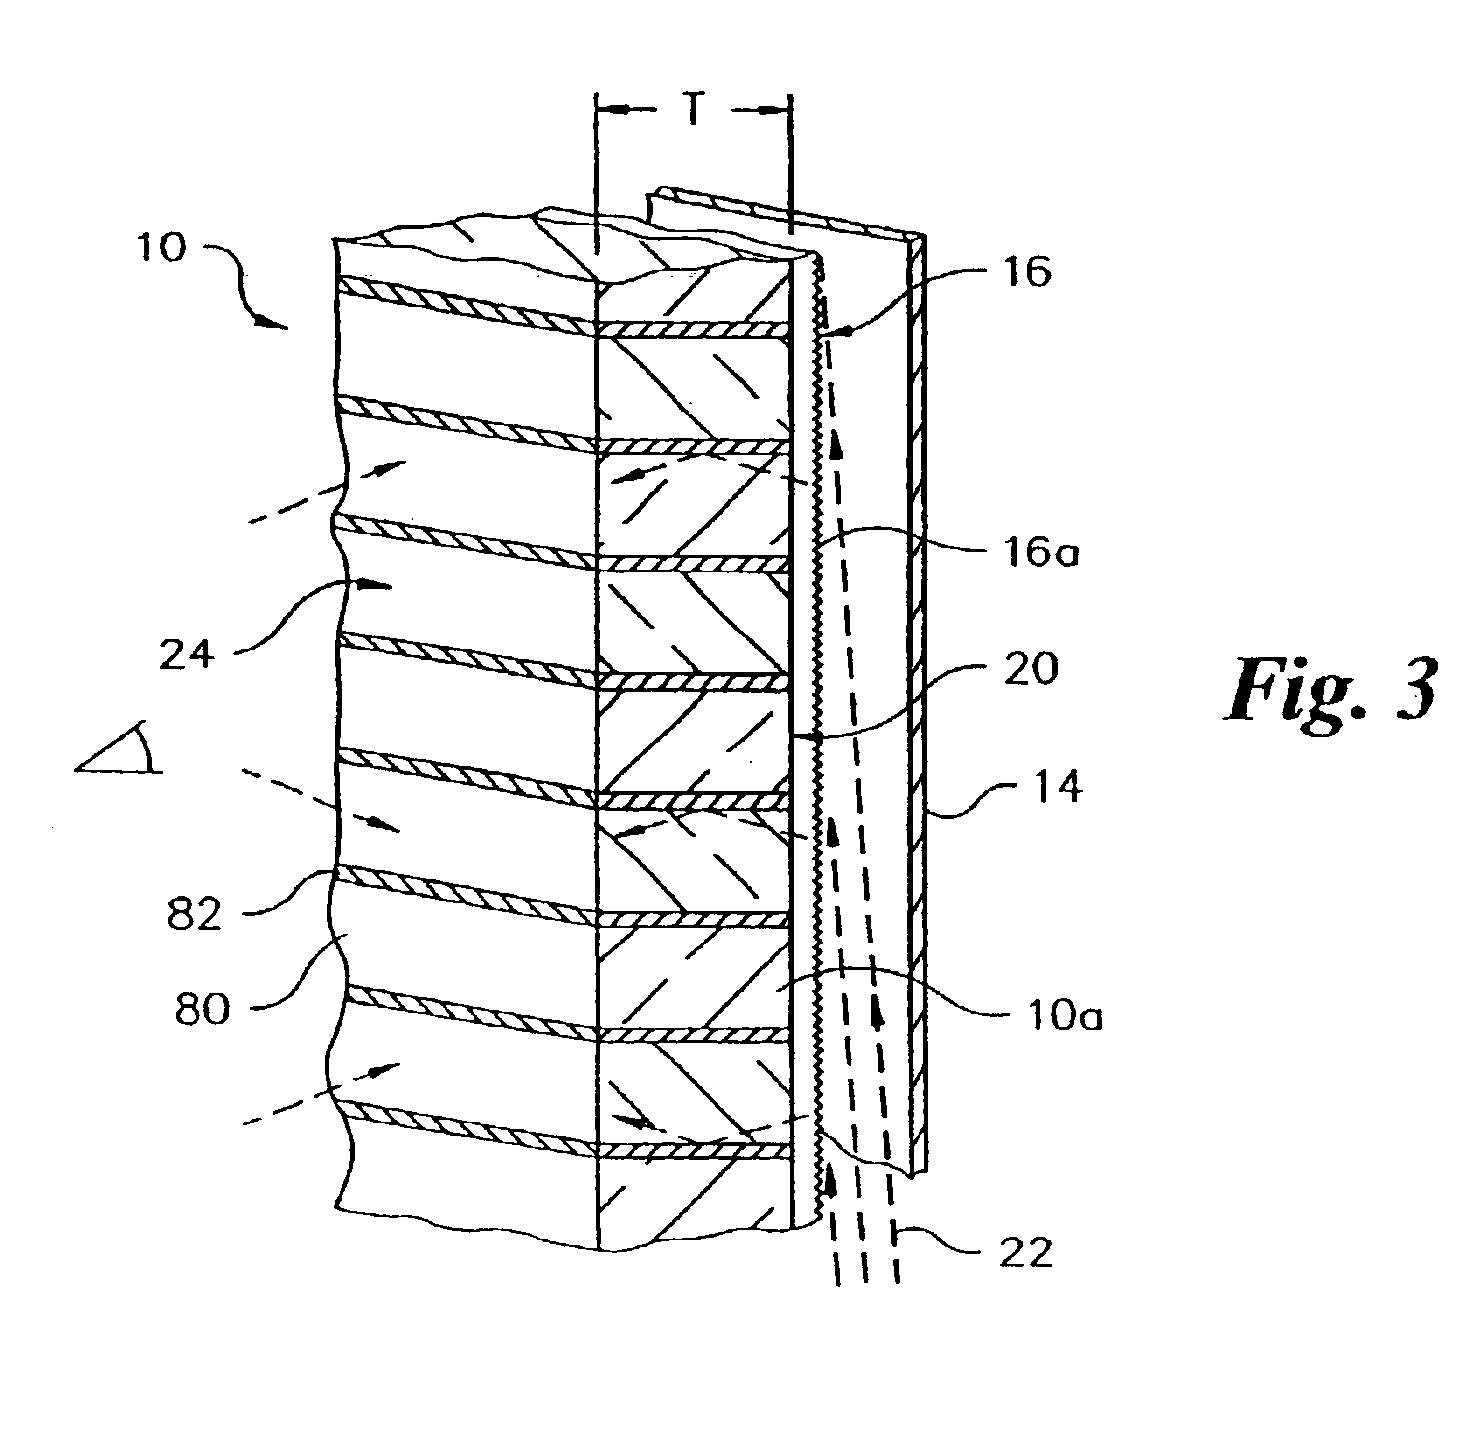 Ultrathin optical panel and a method of making an ultrathin optical panel